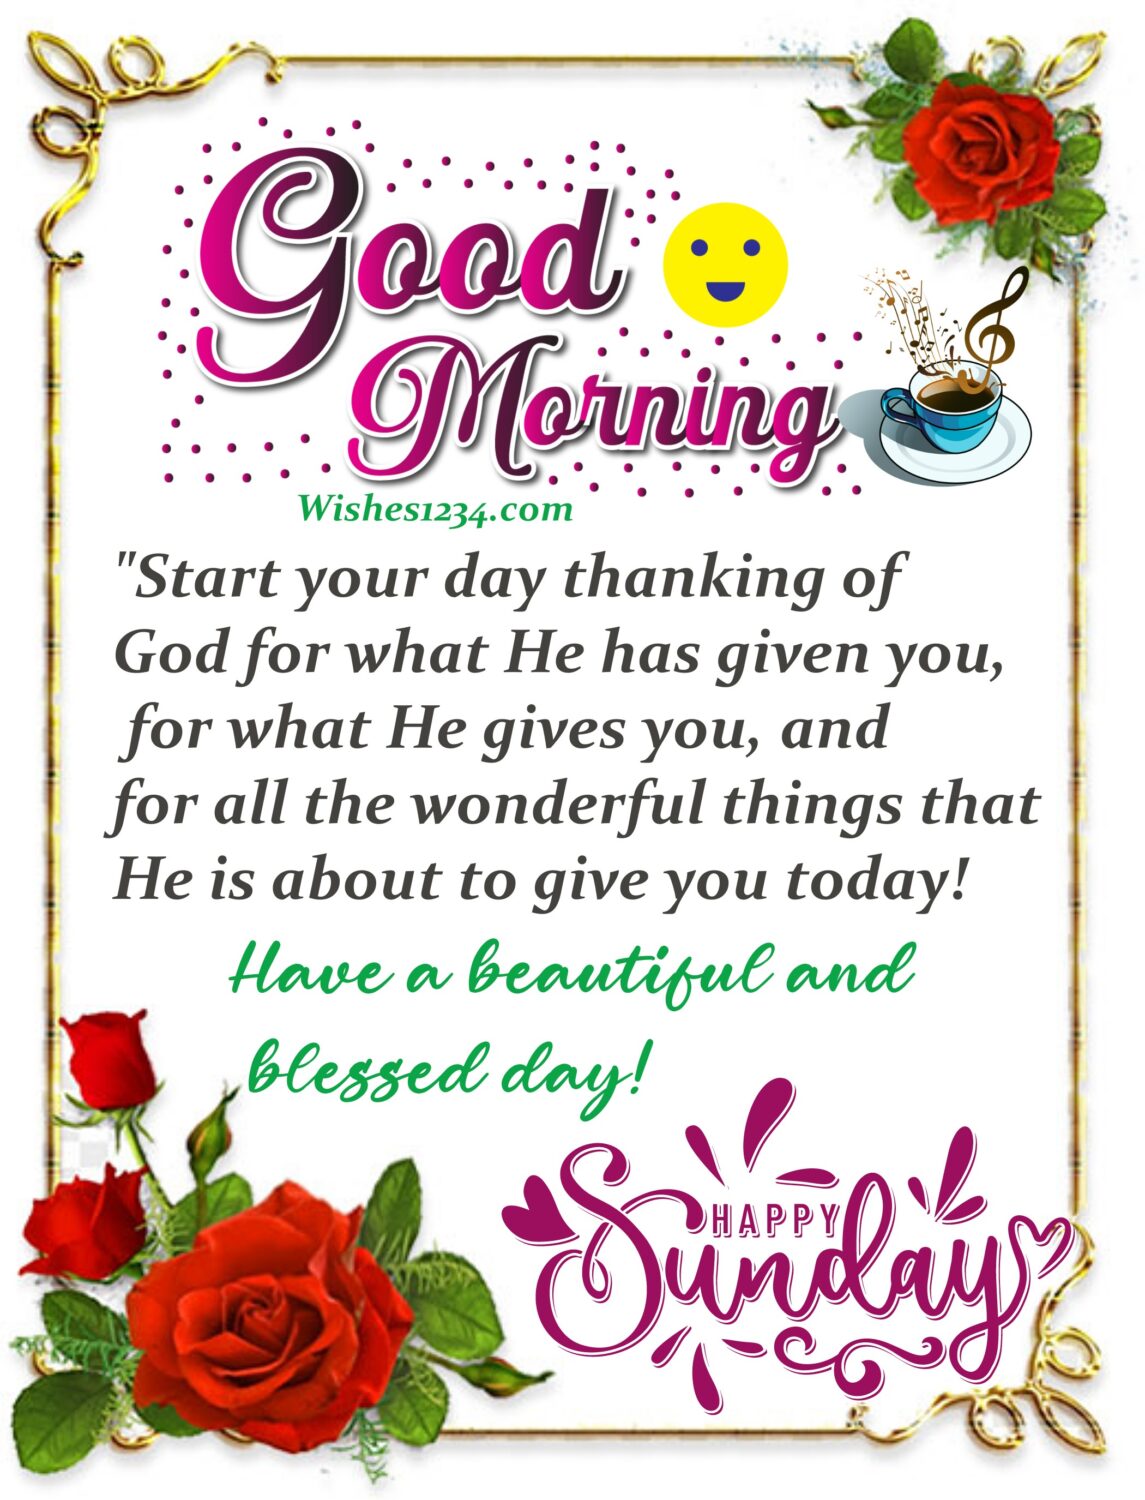 93 Sunday Quotes, Messages & Blessings - Bright Drops